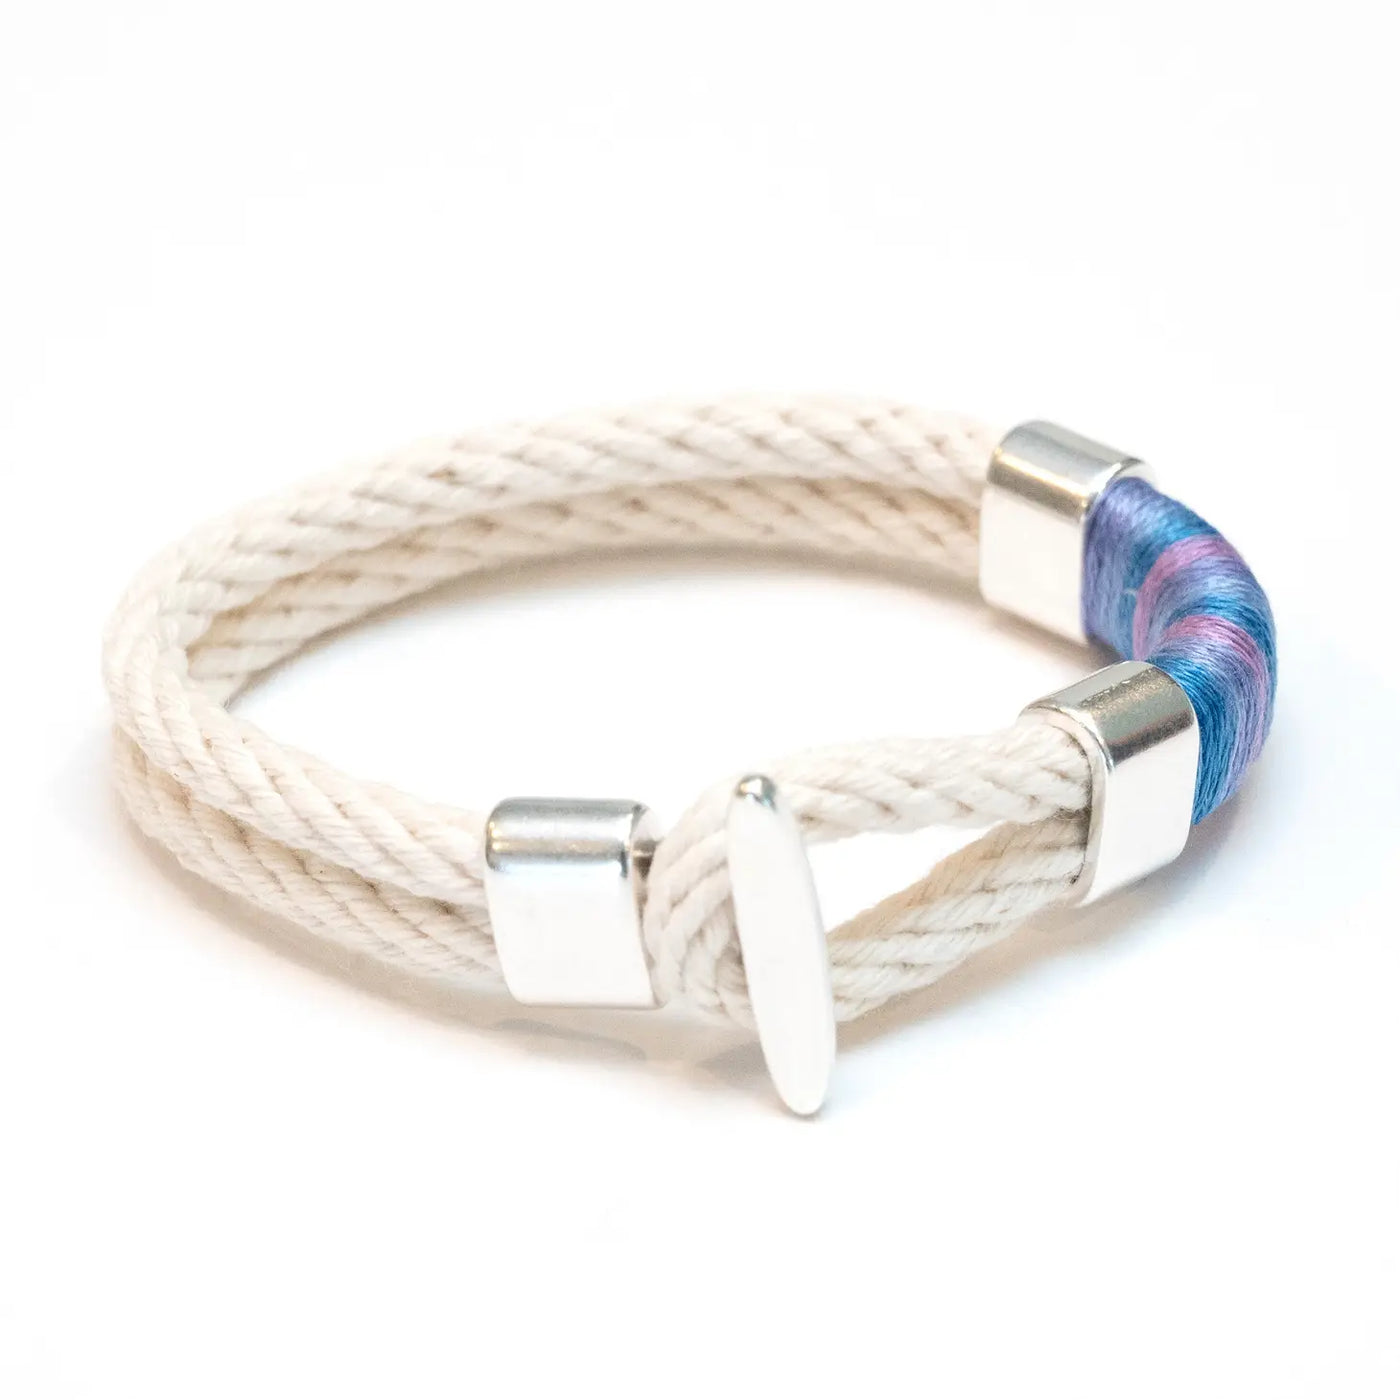 Nautical style bracelet rope silver gold blue purple preppy east coast New England chic jewelry locally made local woman-owned made in USA coastal grandma Modern smart causal female chic effortless outfit womens ladies gift elegant effortless clothing everyday stylish clothes apparel outfits chic winter summer style women’s boutique trendy teacher office cute outfit boutique clothes fashion quality work from home coastal beachy lounge athleisure gift for her midsize curvy sizes 